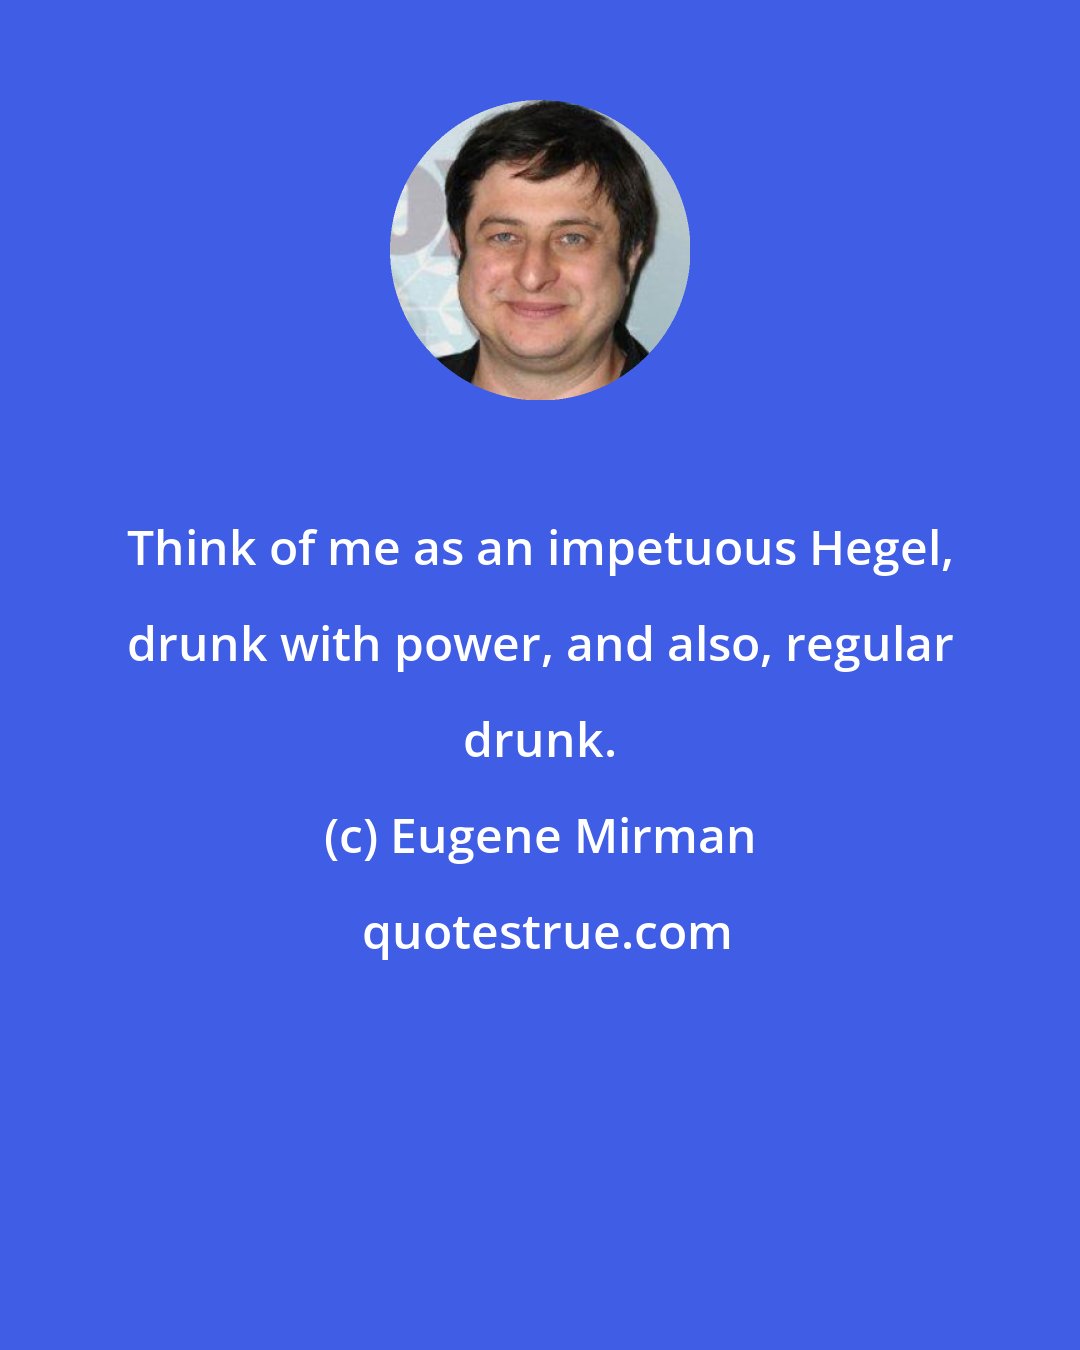 Eugene Mirman: Think of me as an impetuous Hegel, drunk with power, and also, regular drunk.